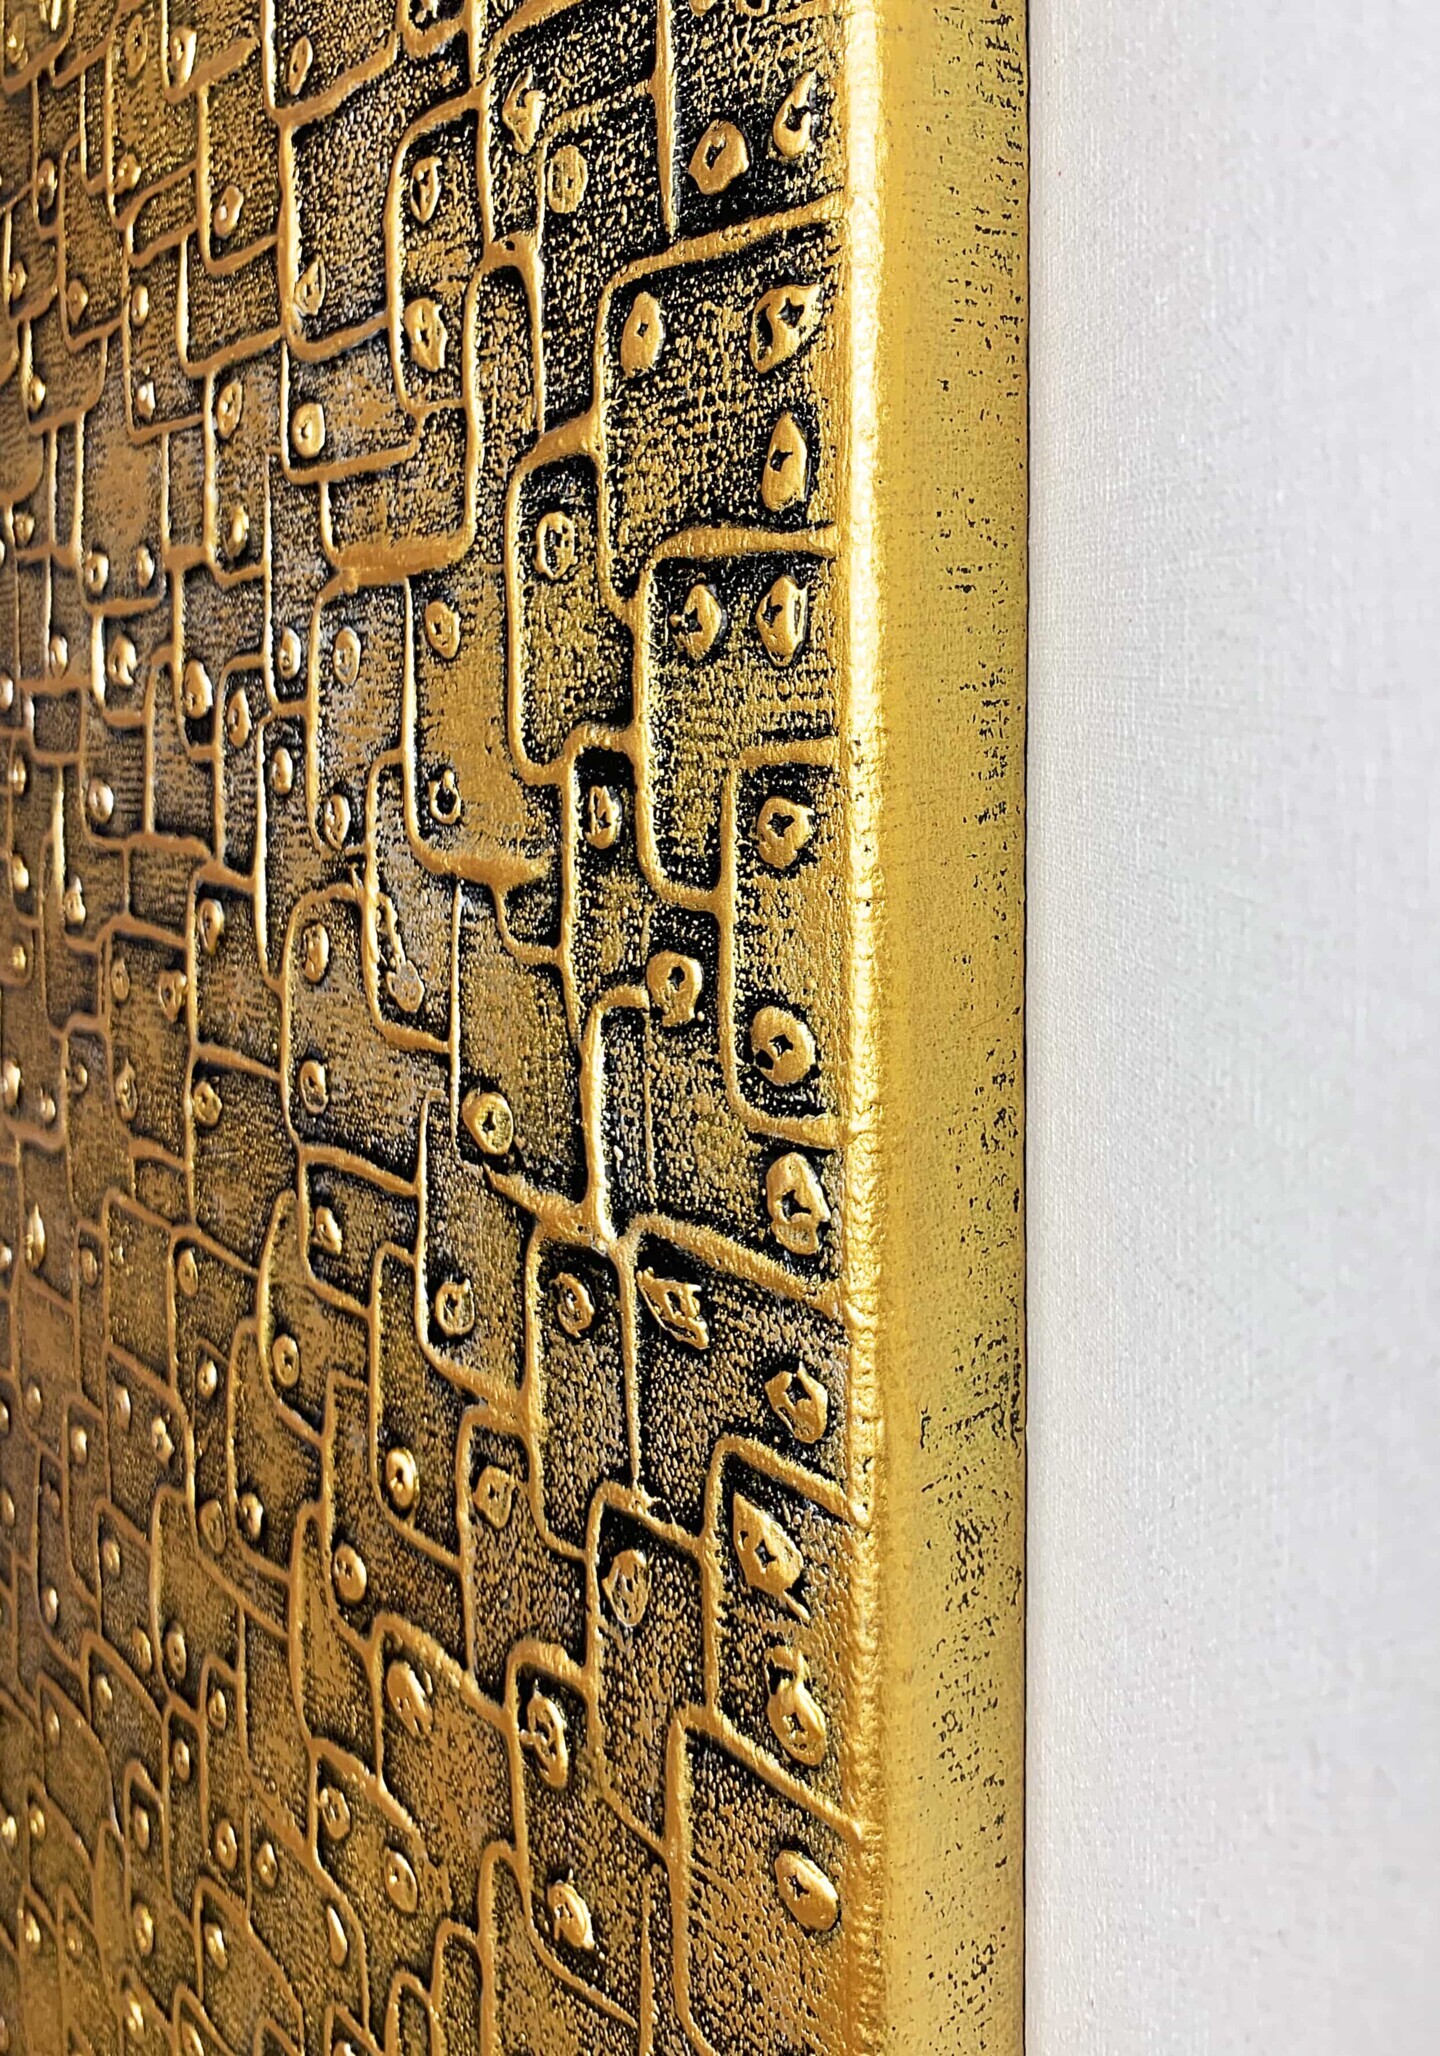 Industrial Chic: Vintage Gold, Painting by Alessia Lu